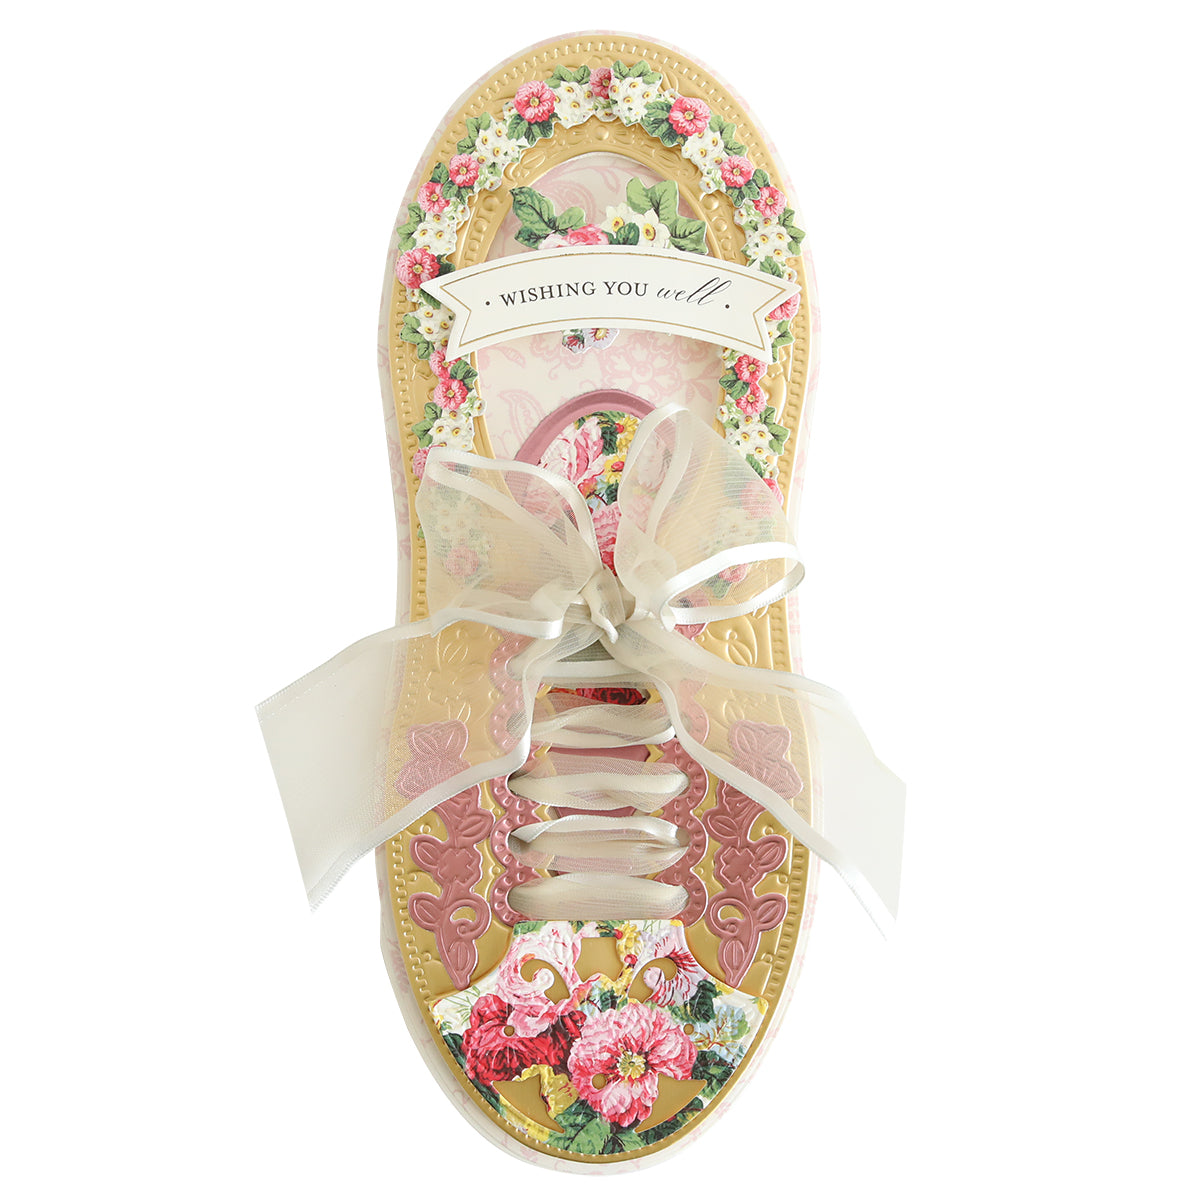 Colorful card shaped like a shoe, decorated with flowers and a ribbon, perfect for the sneakerhead in your life. Featuring a message that reads "Wishing you well." Introducing Paper Sneaker Dies.